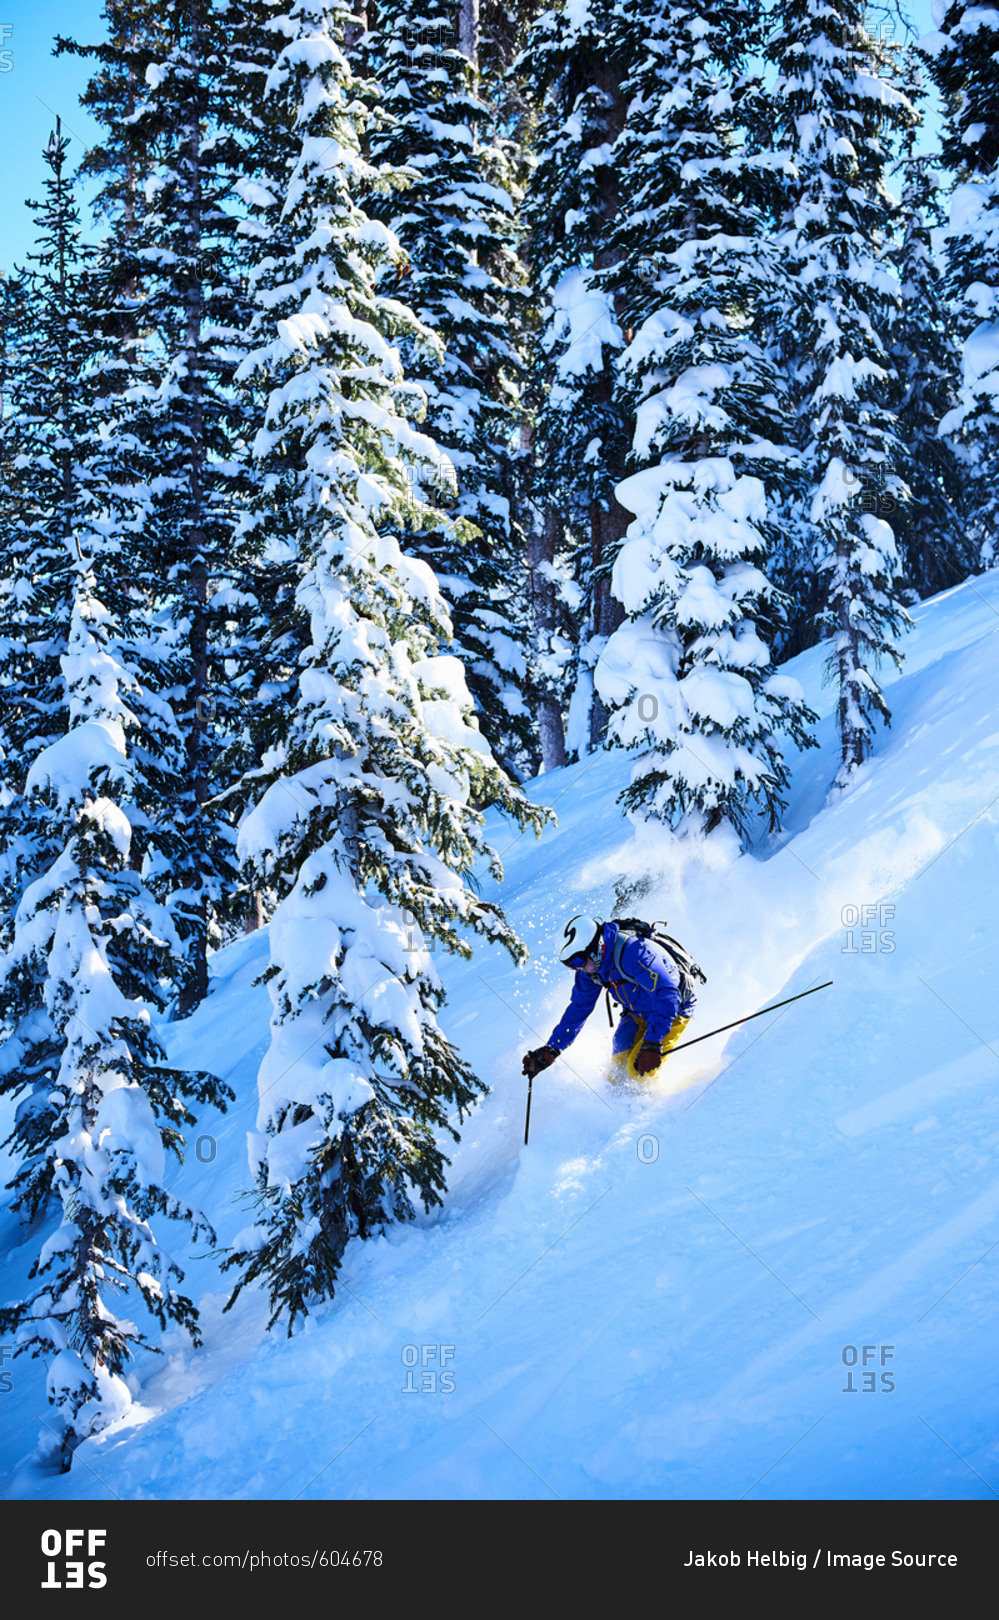 Man skiing down steep snow covered forest, Aspen, Colorado, USA